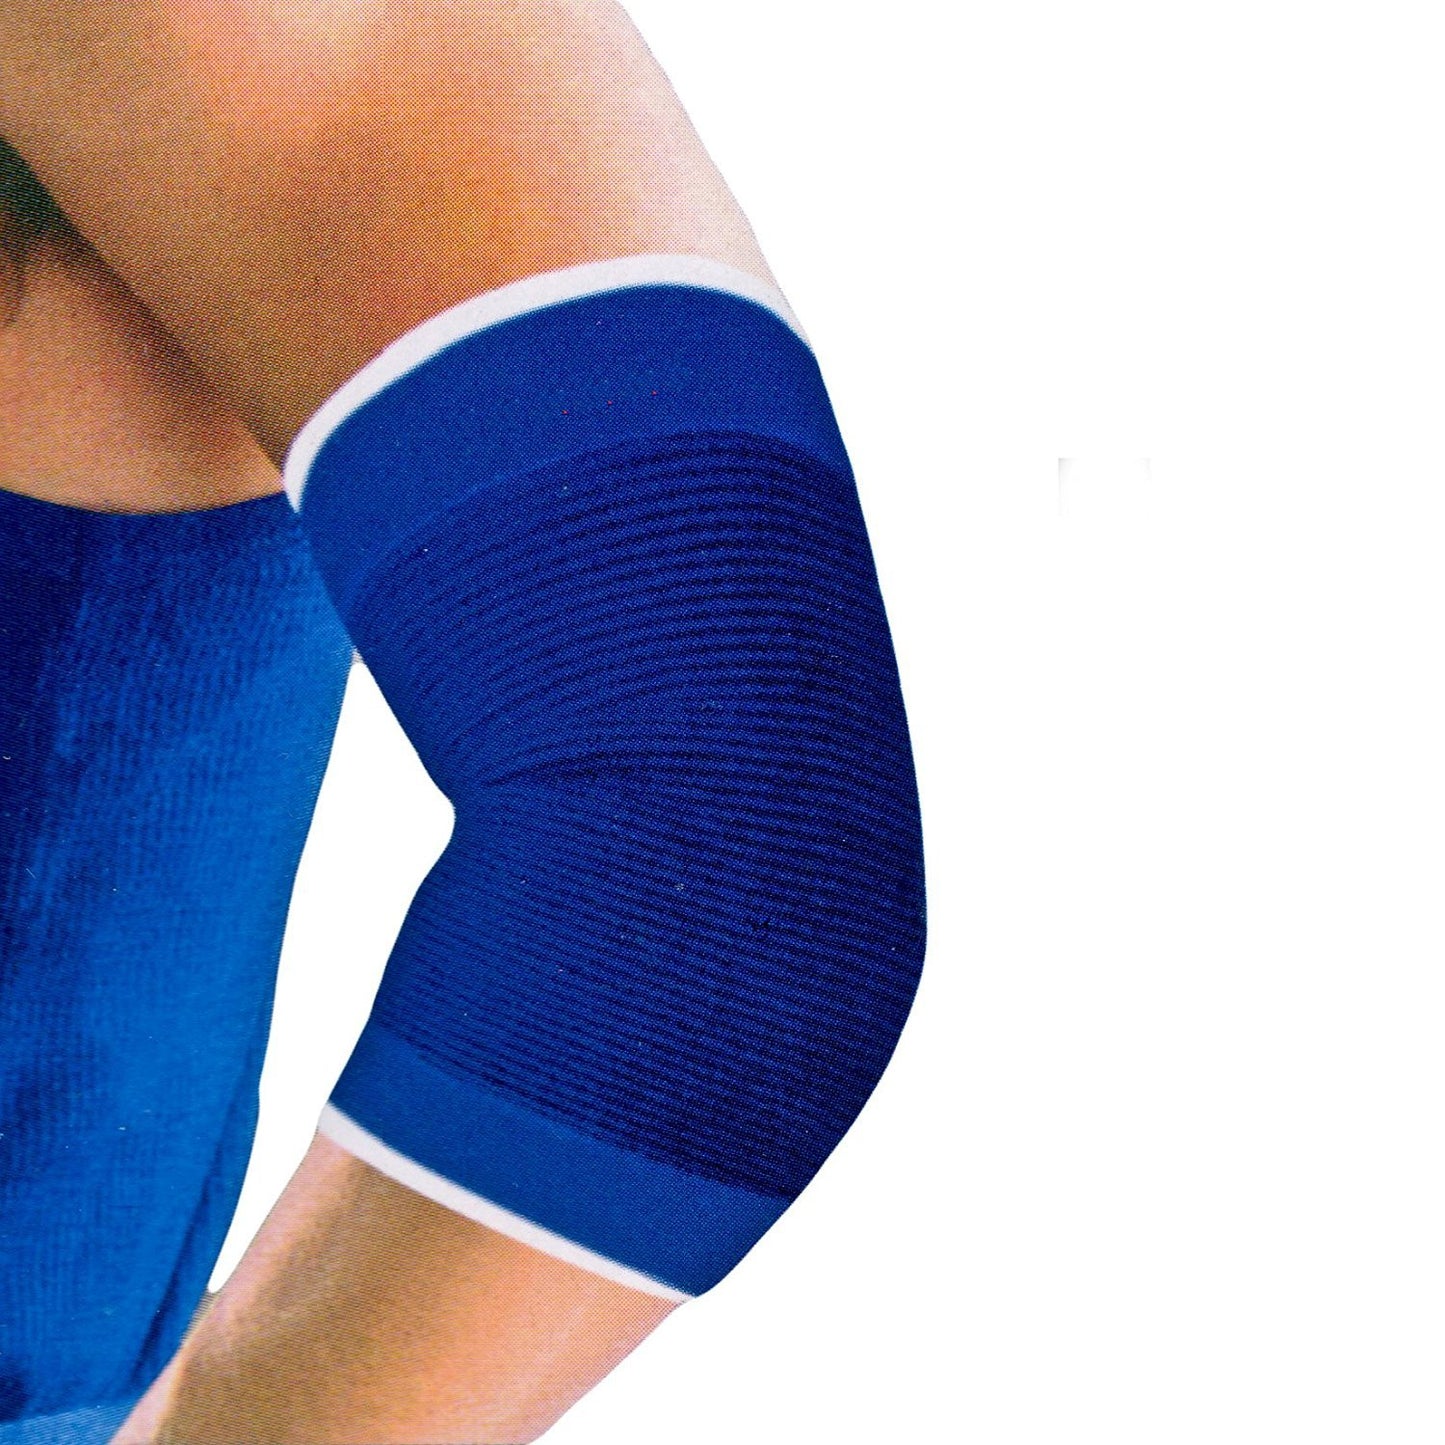 Elbow Support | Body supports in Dar Tanzania